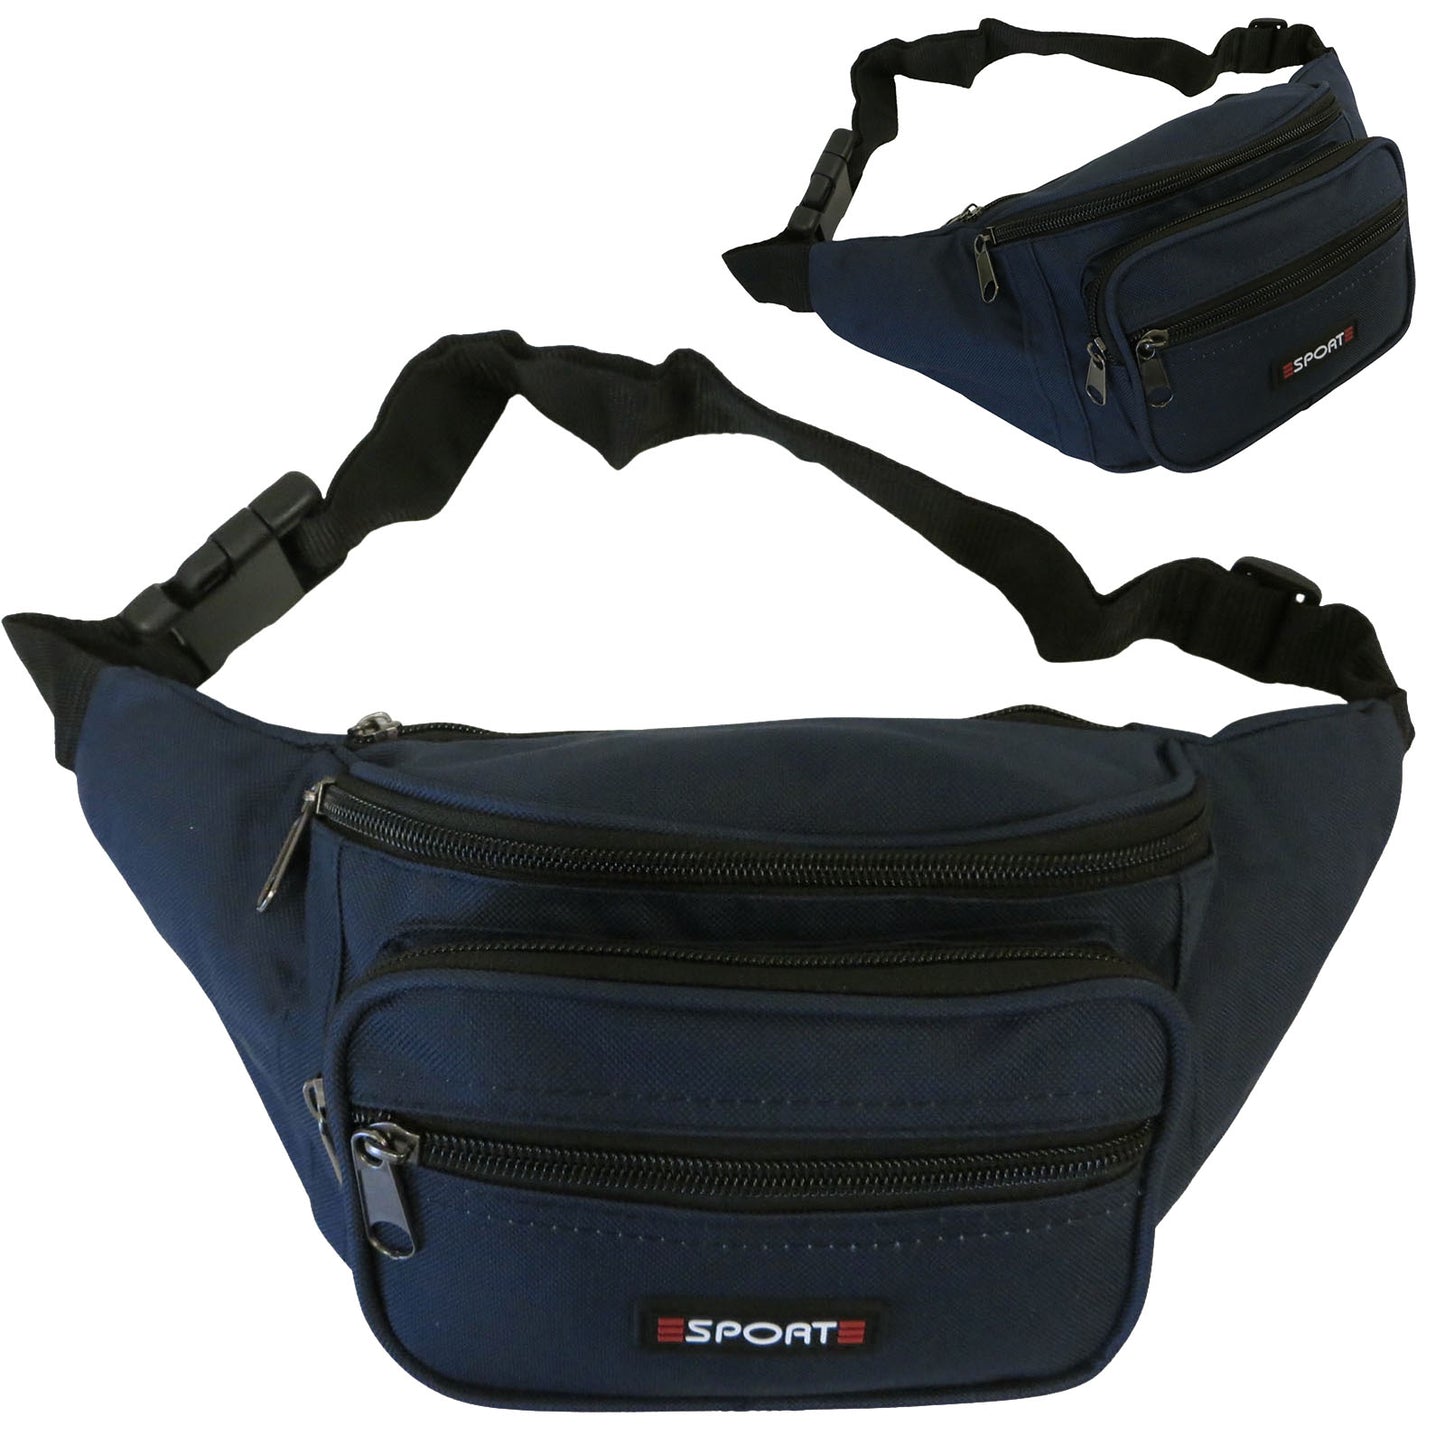 navy blue wholesale fanny pack waist bag for men and women casual wear and travel